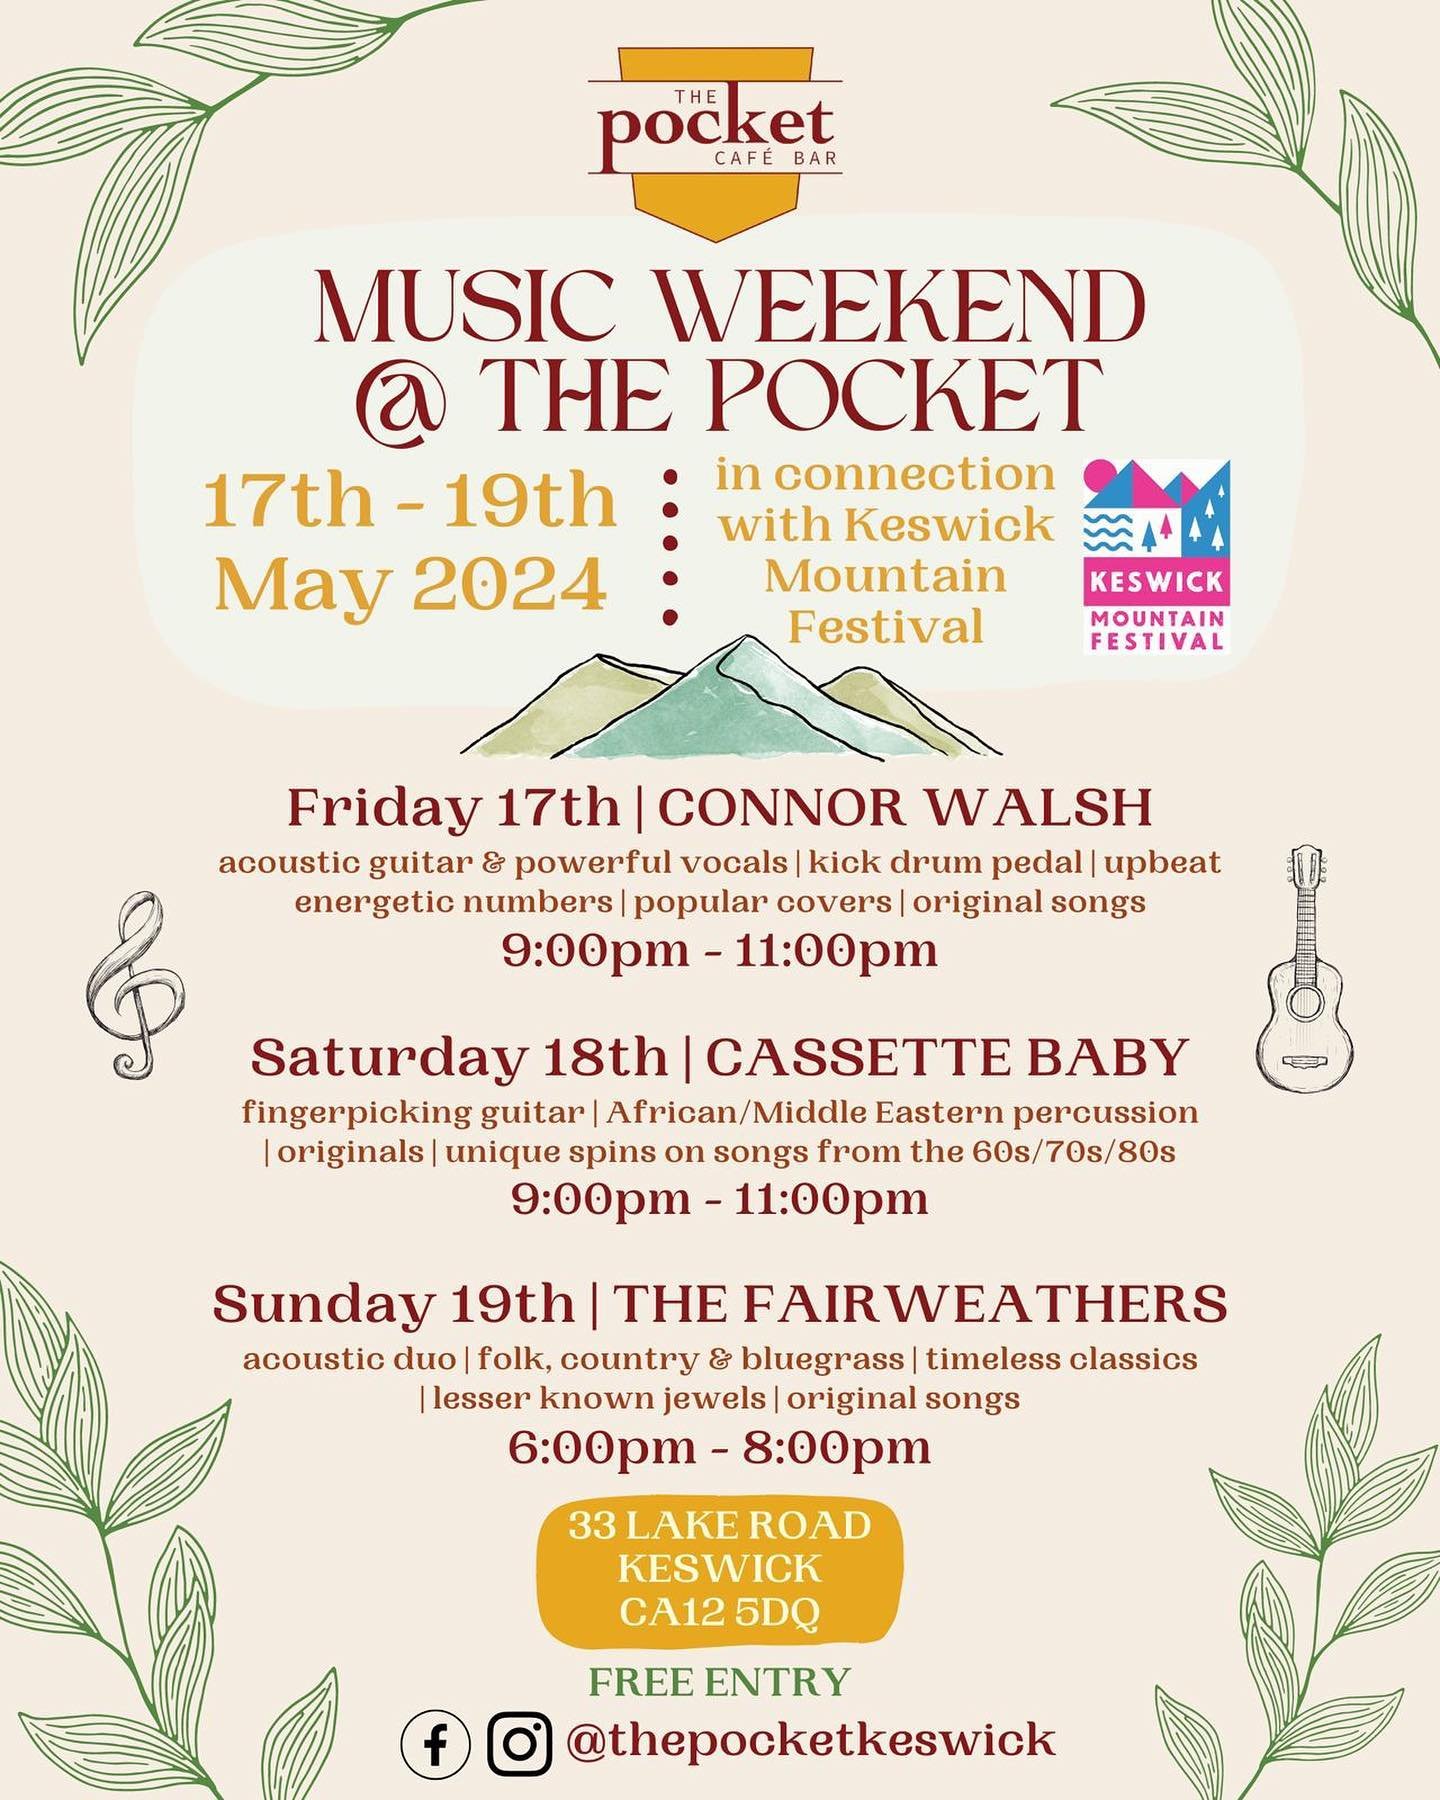 We&rsquo;re very excited to be collaborating with @keswickfestival again this year! ⛰️ The live music at the festival will run until 9:00pm on the Friday and Saturday, at which point we will take over down at The Pocket. We are also hosting music on 